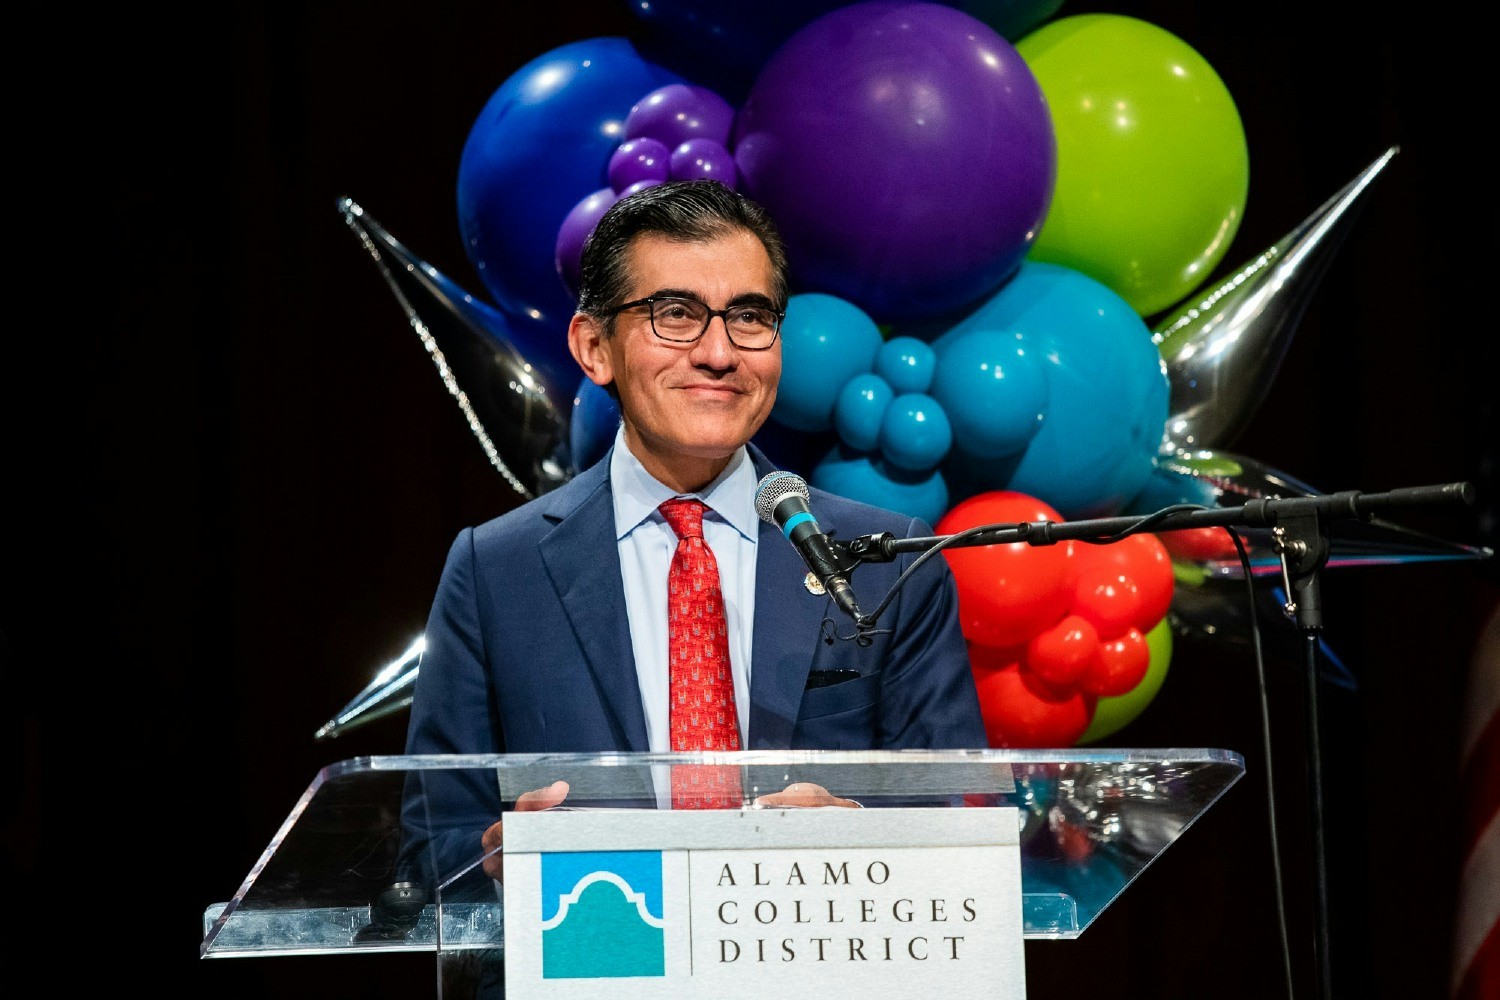 Chancellor of The Alamo Colleges District, Dr. Mike Flores, welcomes employees during a fall convocation event